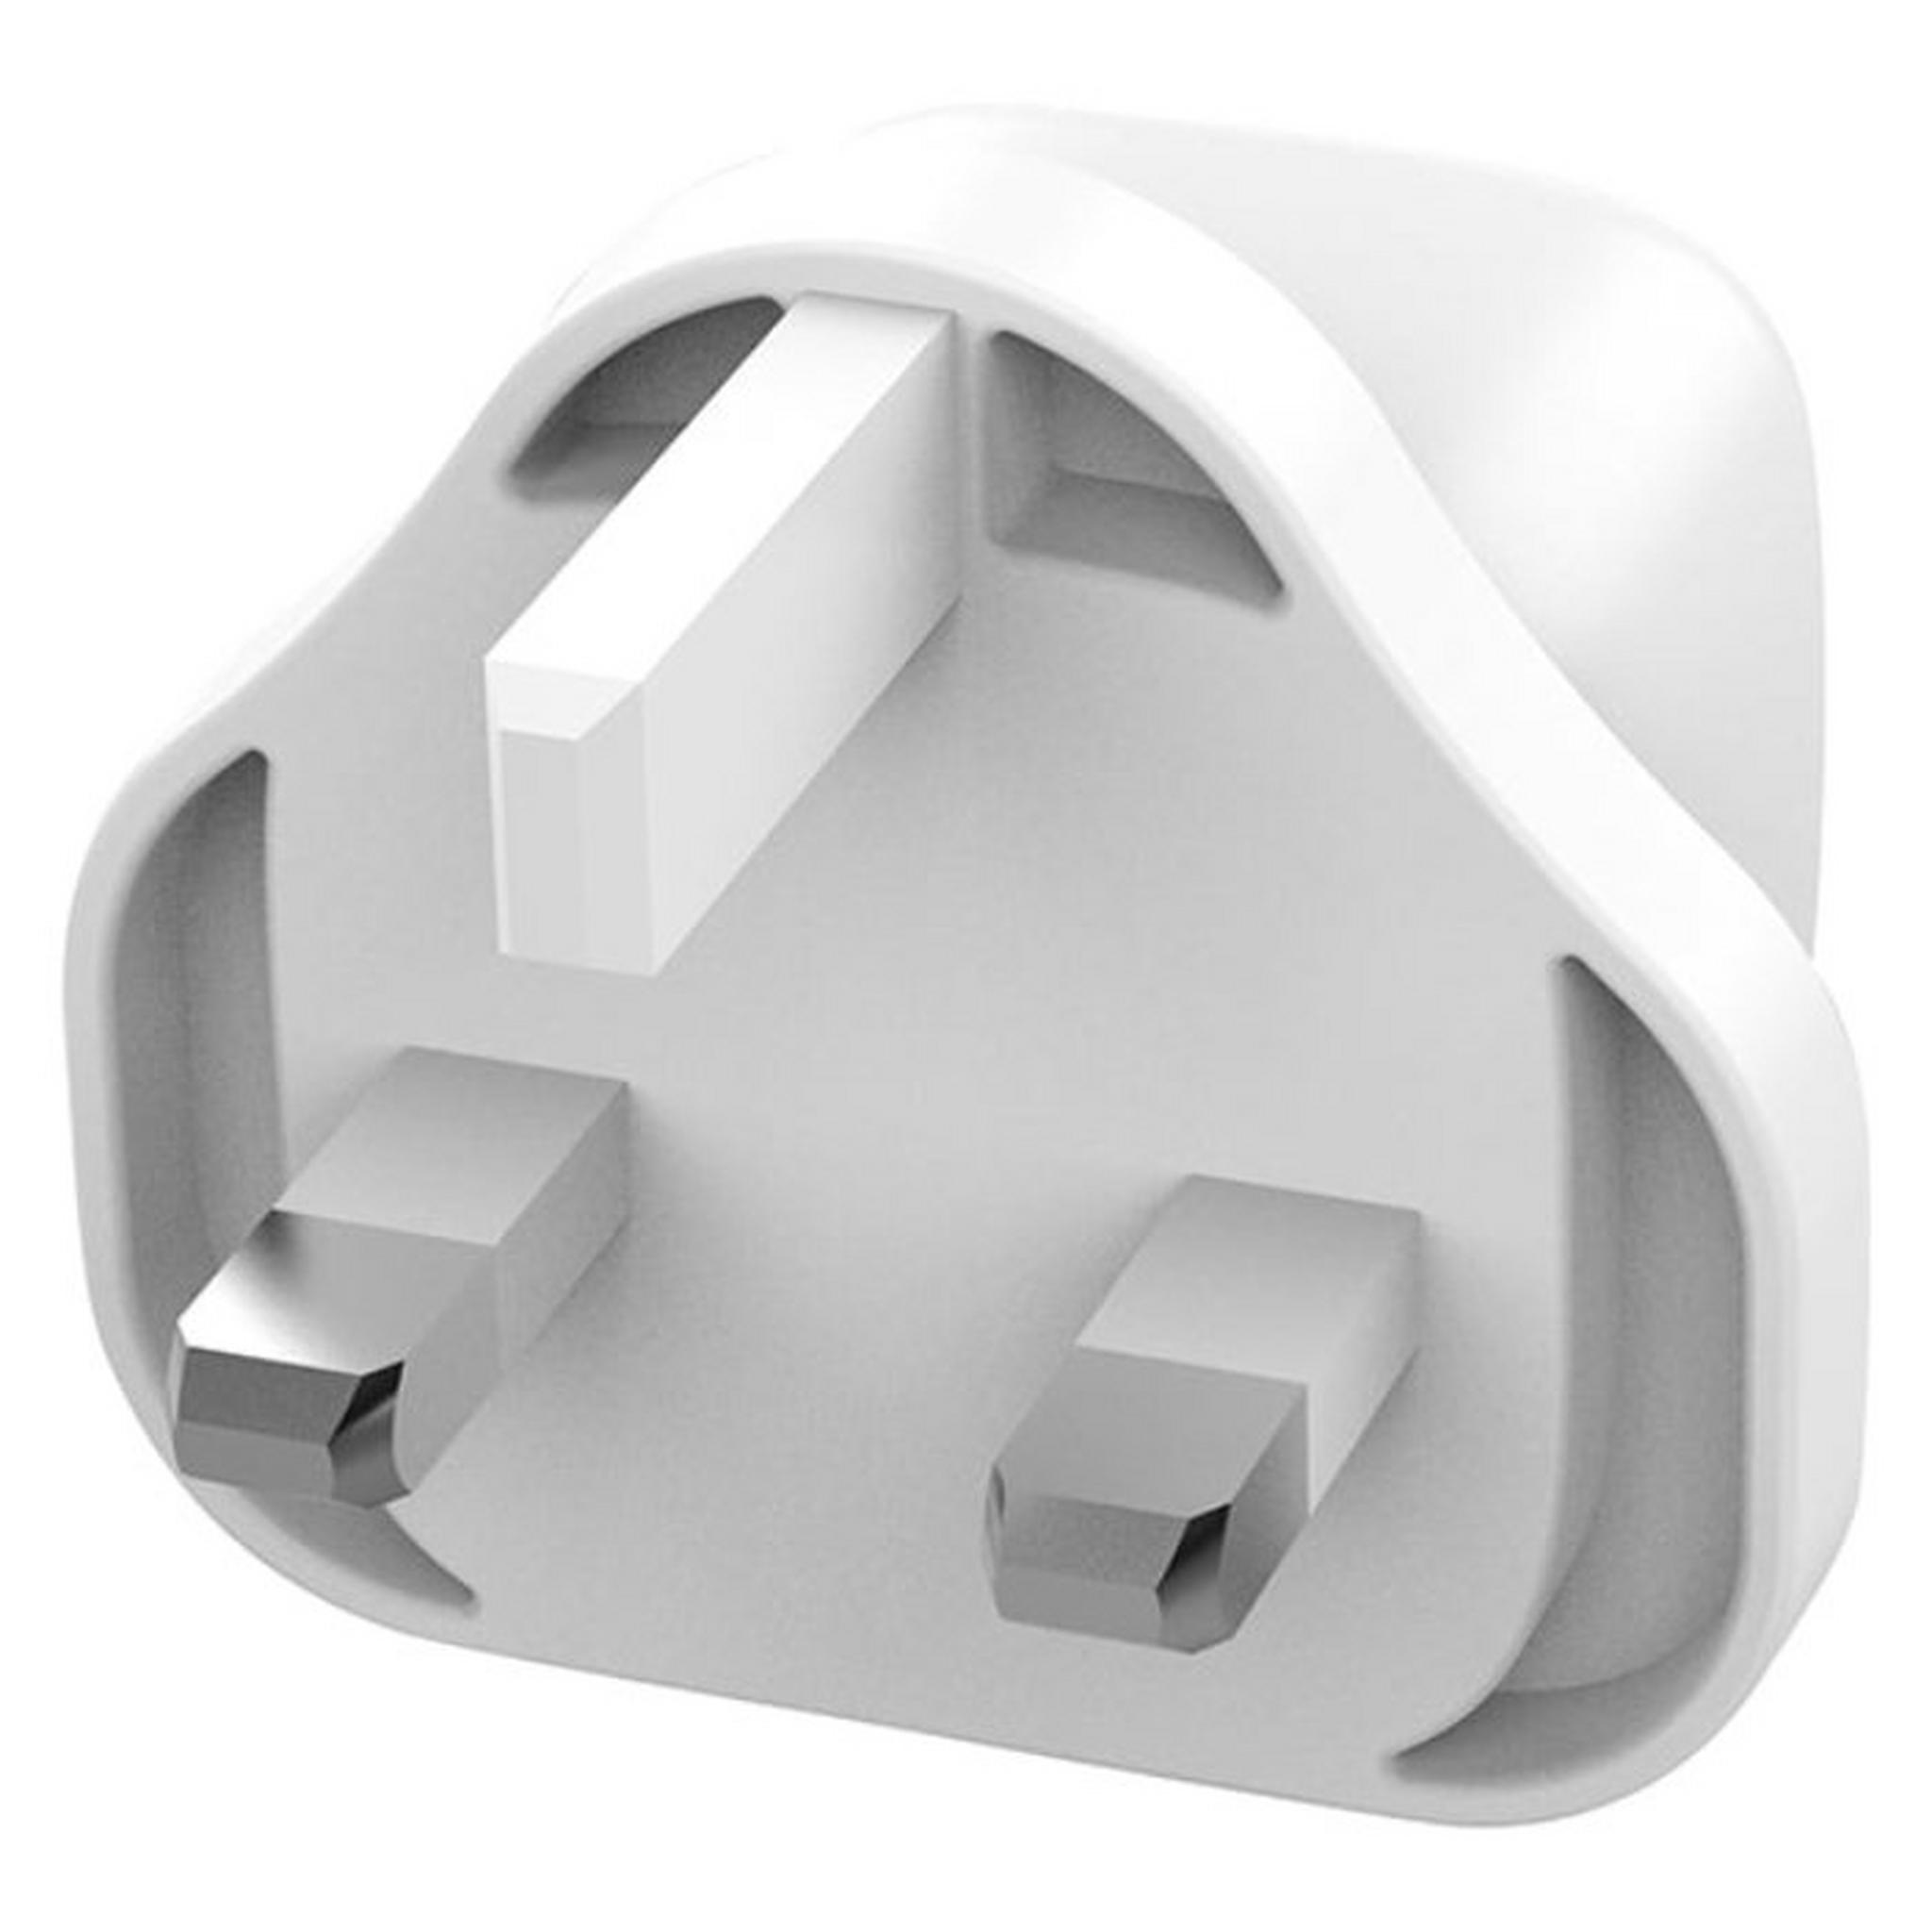 Skech Power USB-C Charger With USB-C Cable, 20W, SKEL-PD20UK-WC-WTE – White